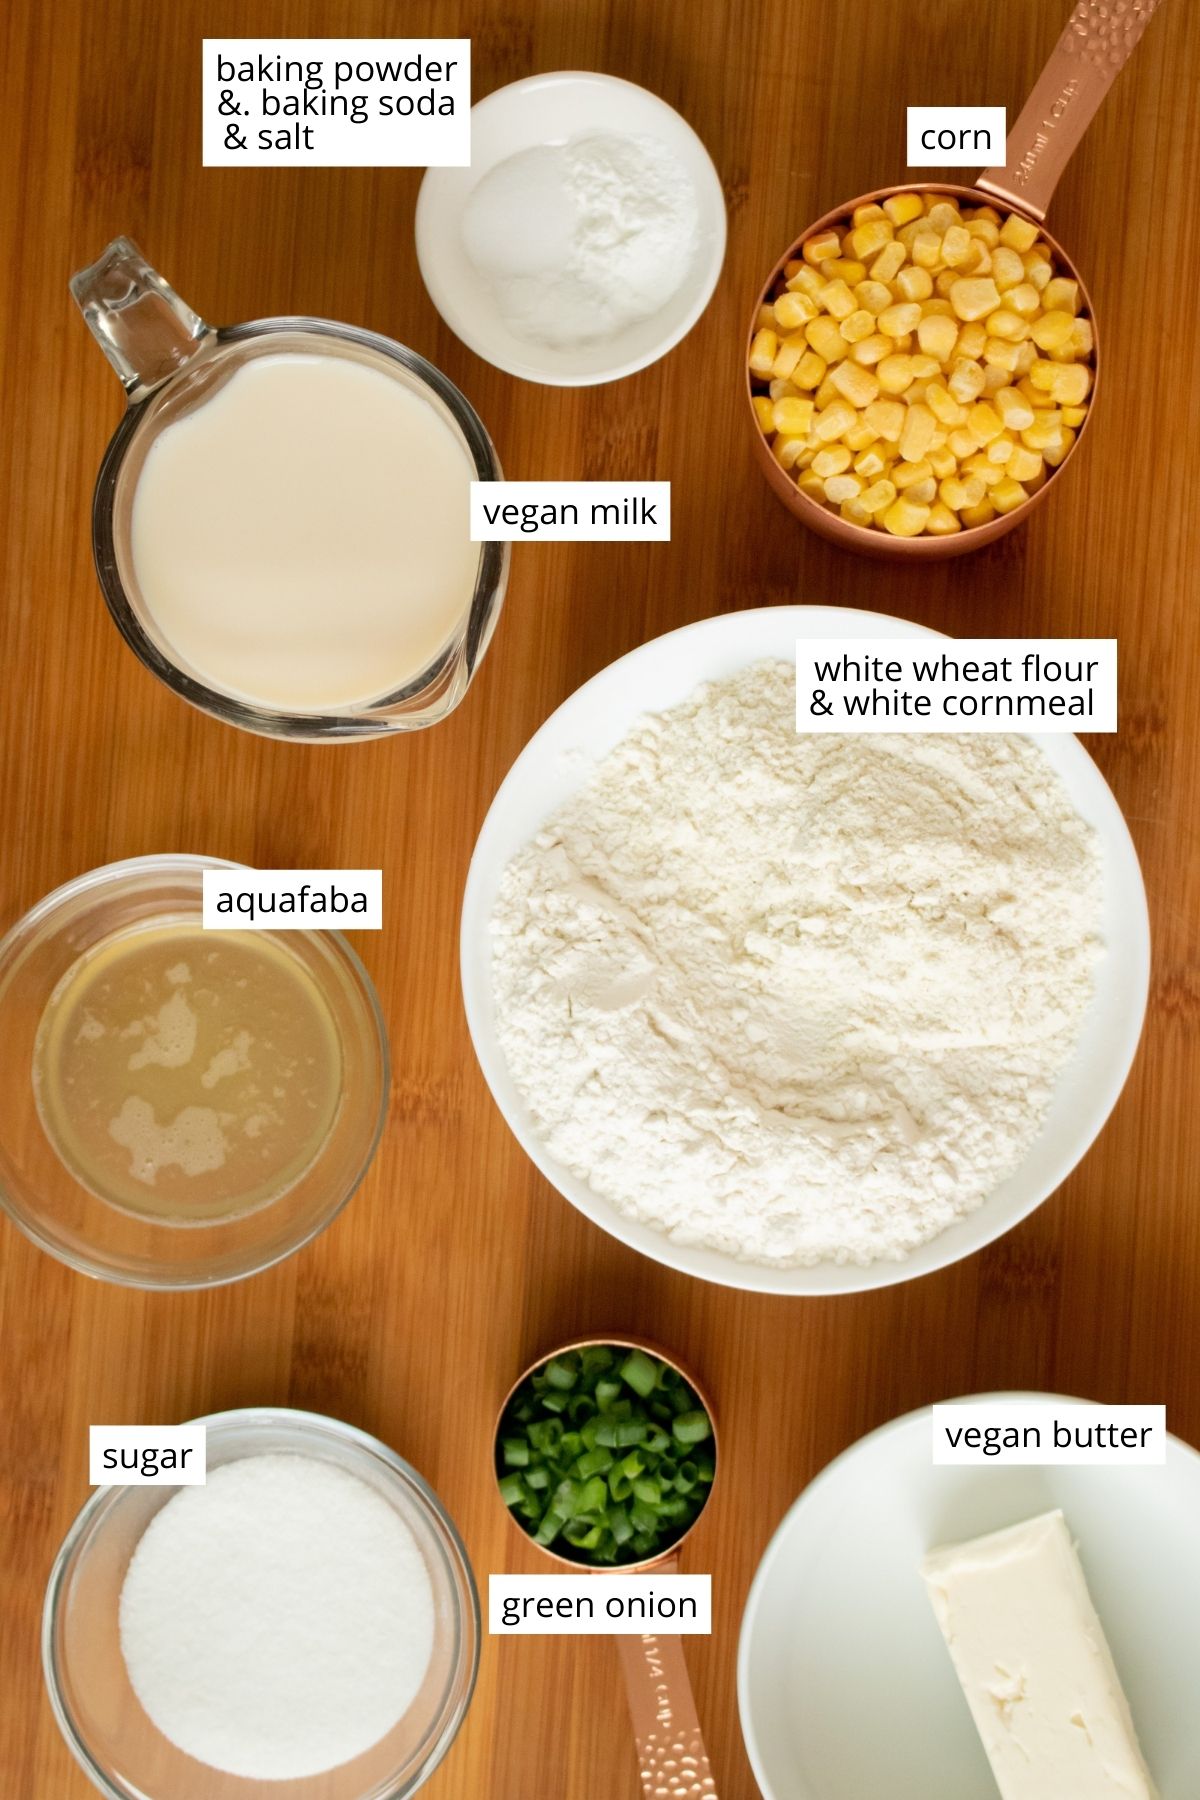 white cornmeal, flour, and other muffin ingredients in bowls on a wooden table